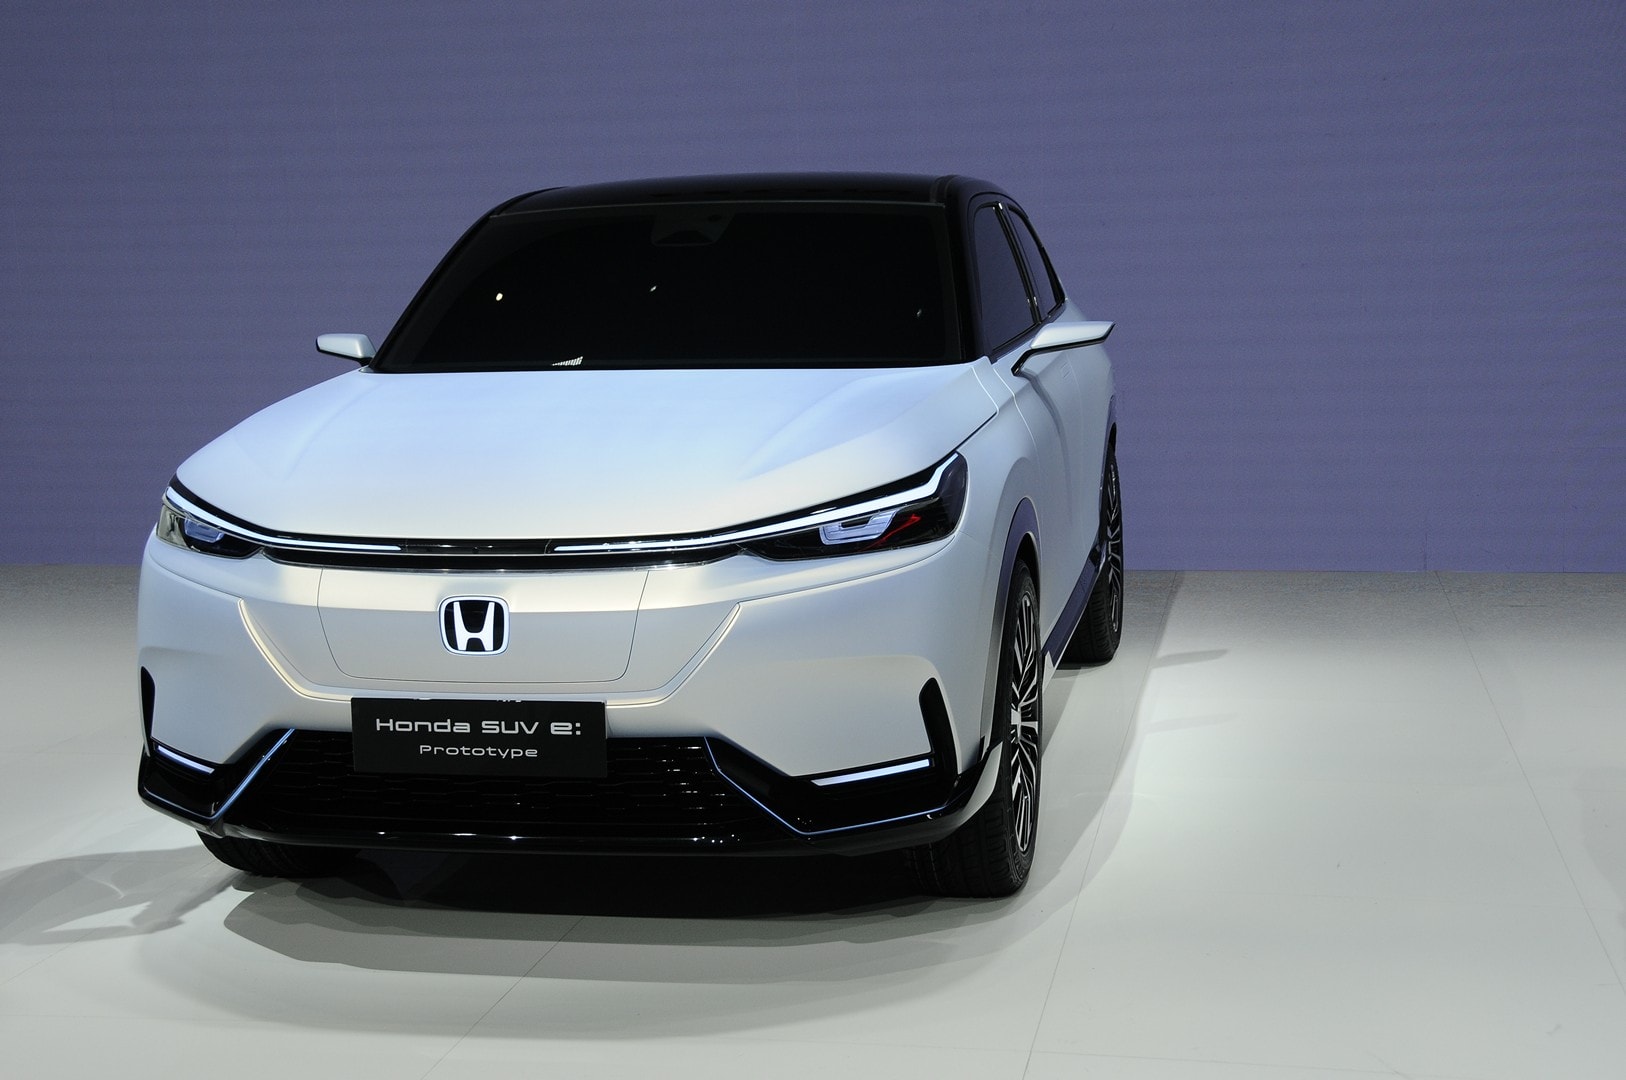 Honda Reveals Electric SUV Prototype in China, Looks Like the New HR-V ...